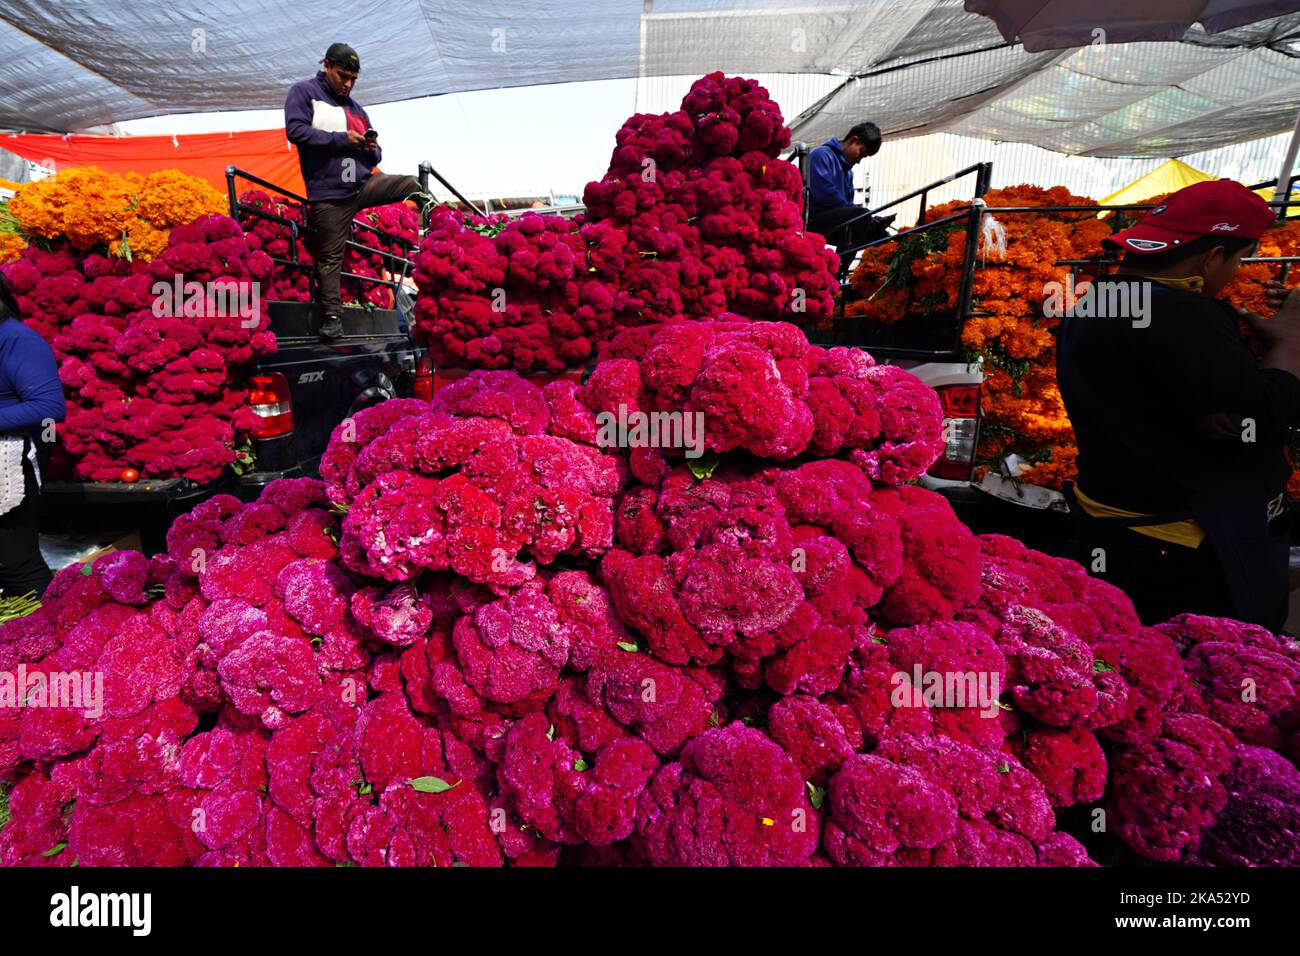 Mexico City, Mexico. 31st Oct, 2022. Workers unload giant piles of red cockscomb and cempasuchil, the traditional Day of the Dead flowers used to decorate altars and gravesites during the annual festival at the Jamaica Flower Market, October 31, 2022 in Mexico City, Mexico. Credit: Richard Ellis/Richard Ellis/Alamy Live News Stock Photo